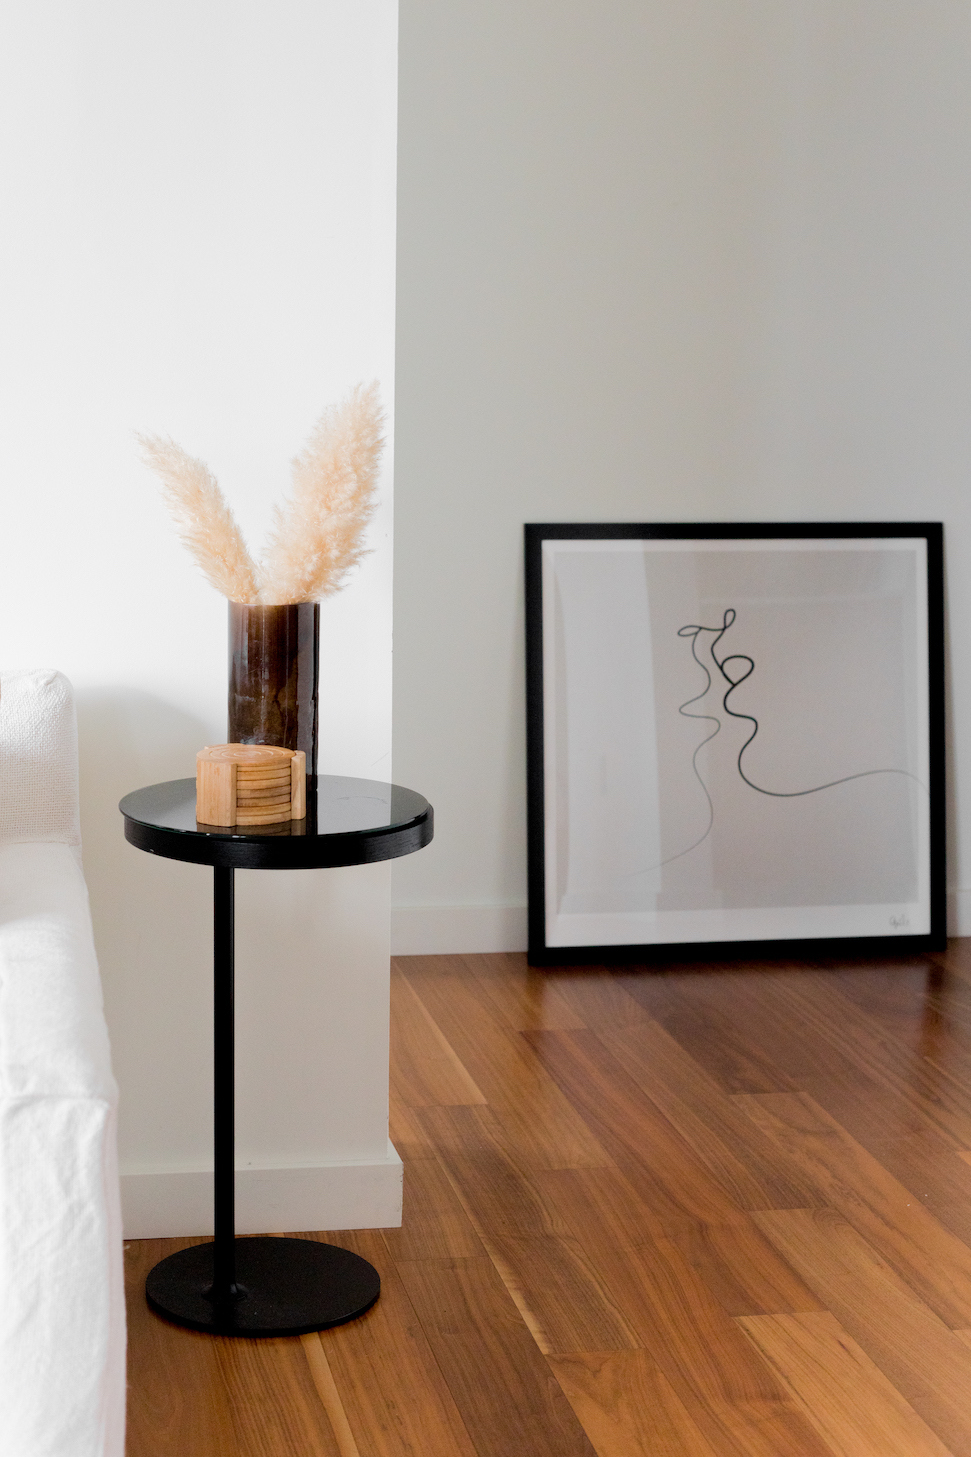 Minimal bedroom scene with a sliver of white bedding, a bedside table with a vase of dried grass, and a frame laid on the floor, resting on the wall